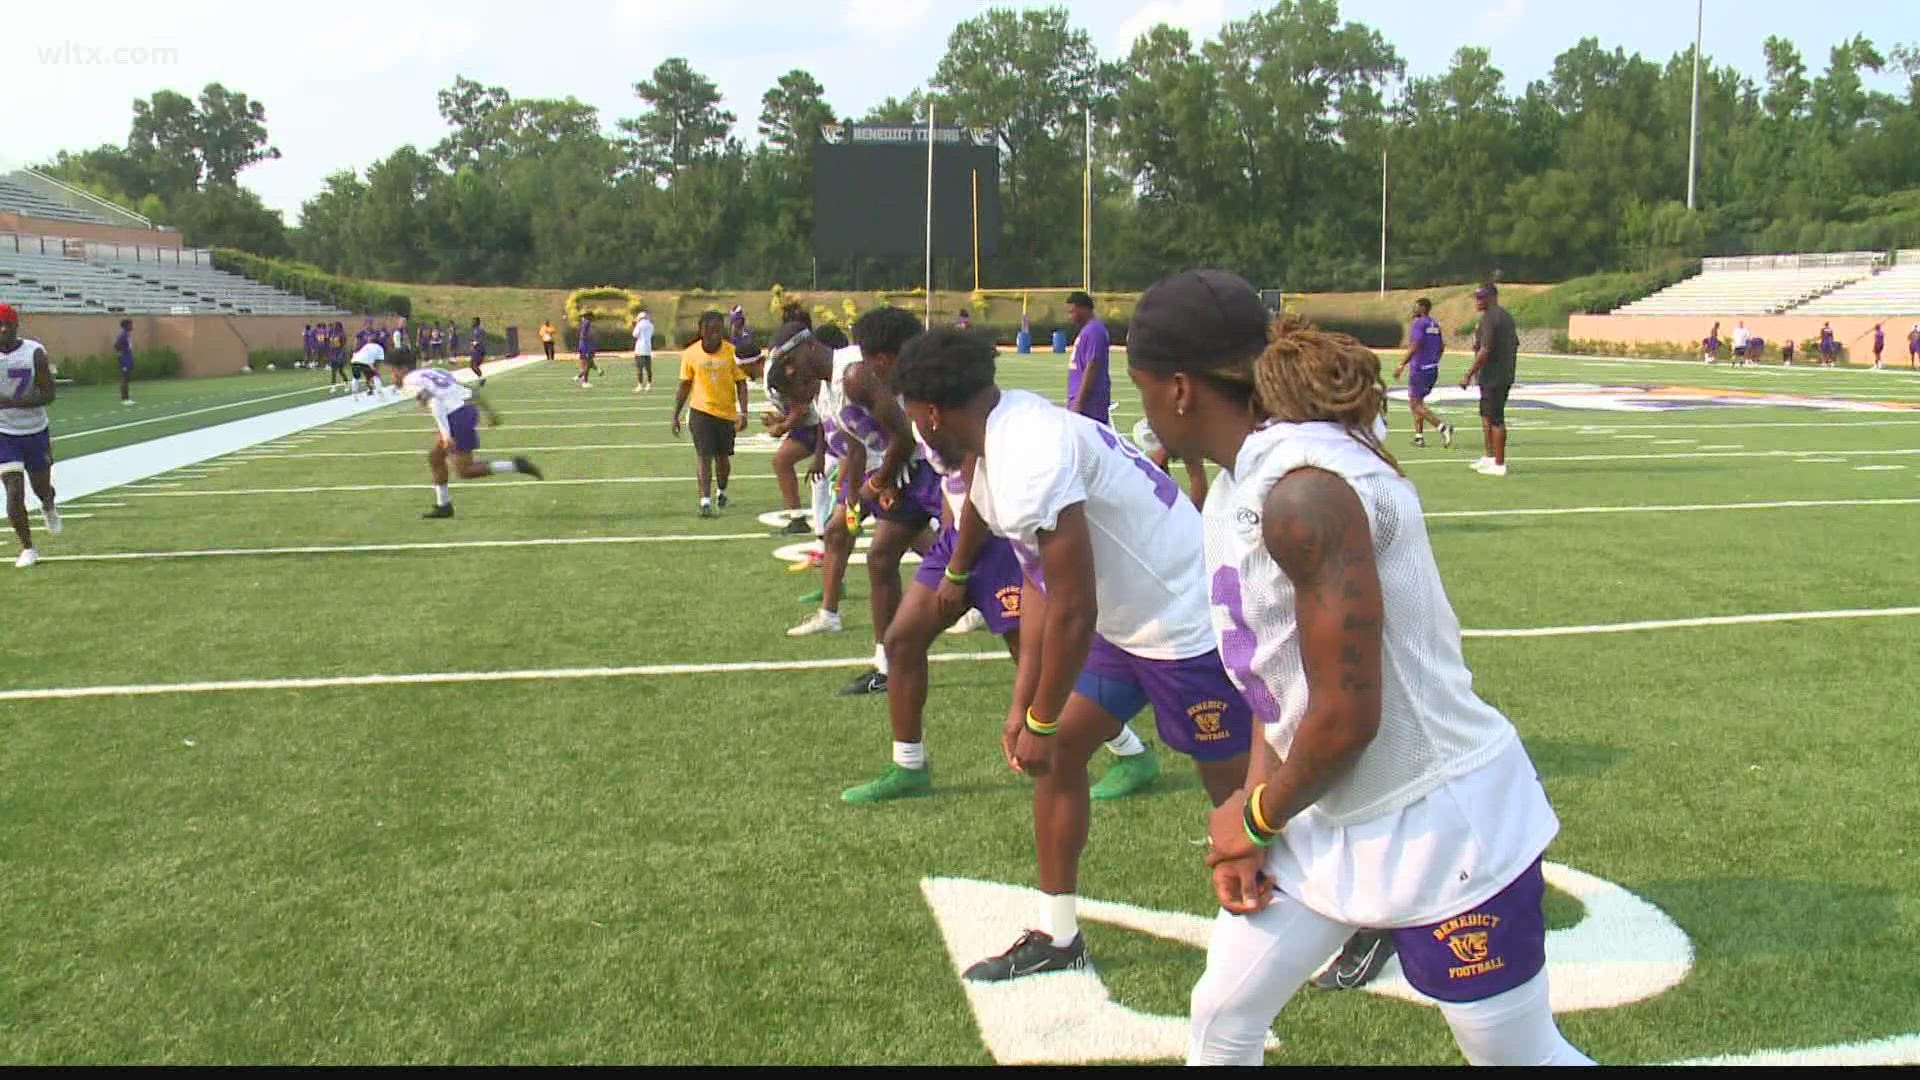 Benedict College's first workout of the preseason camp was cut short due to lightning in the area. But the Tigers still managed to get on the field for a few minutes